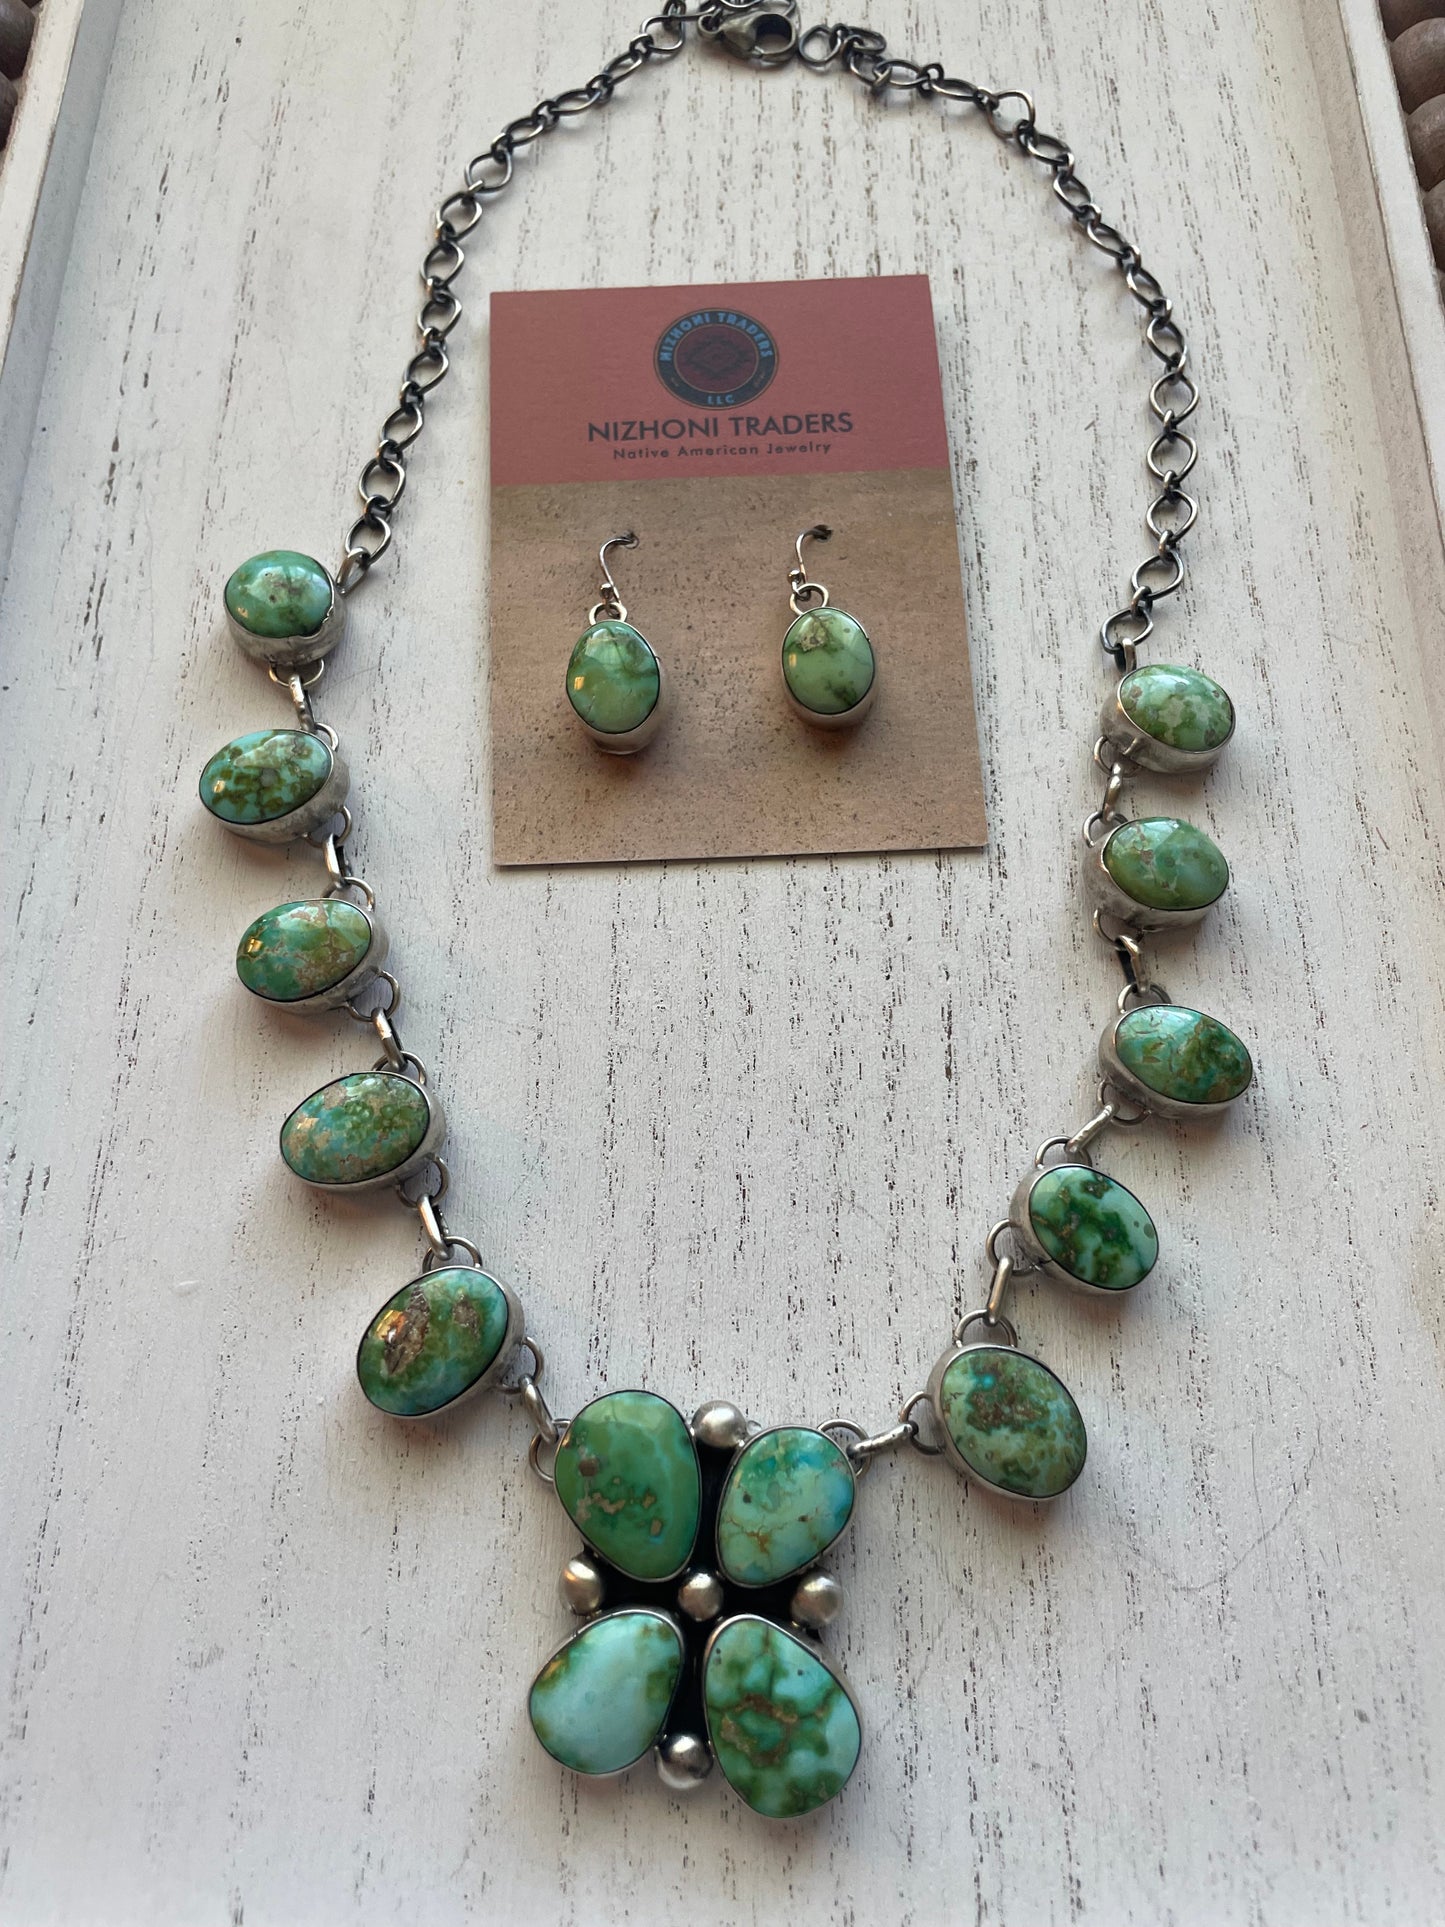 Beautiful Navajo Sterling Silver Sonoran Mountain Turquoise Necklace & Earring Set Signed B Johnson